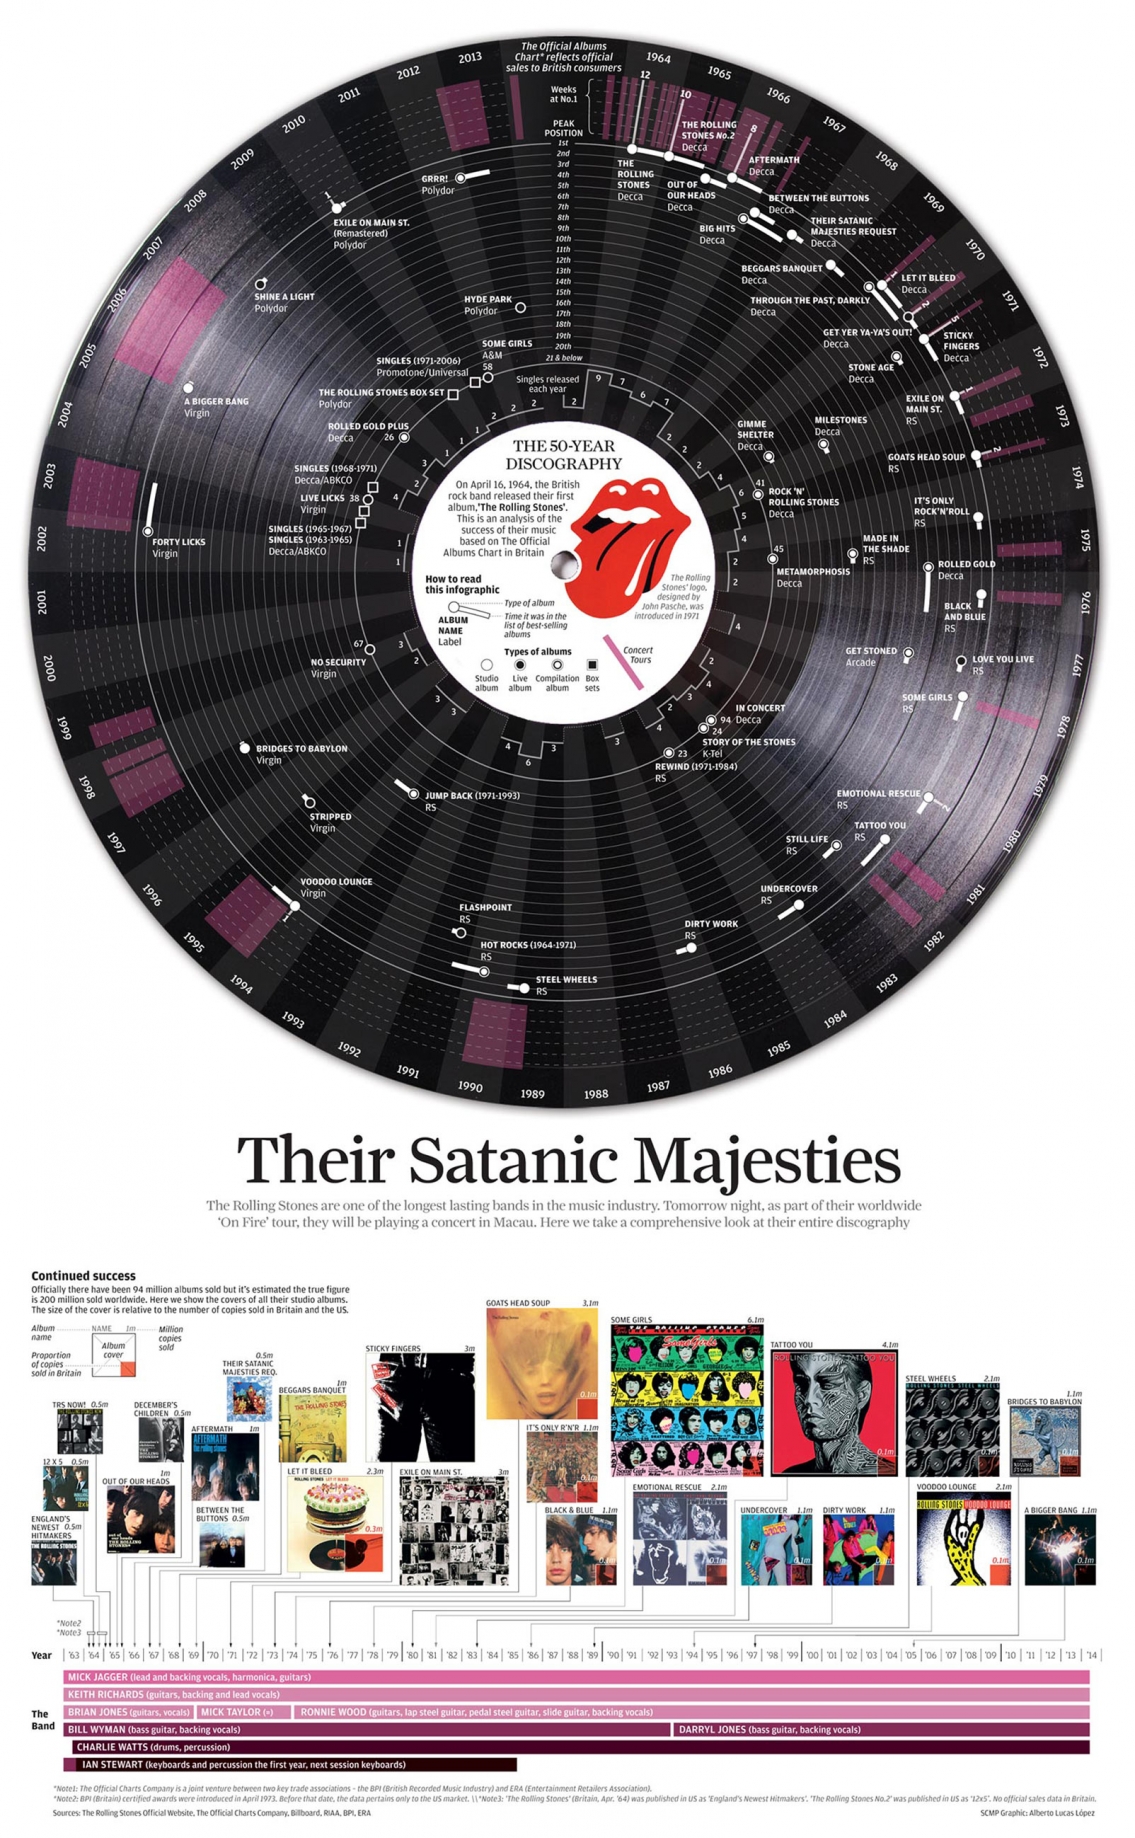 50-Year Discography of The Rolling Stones Music Infographic